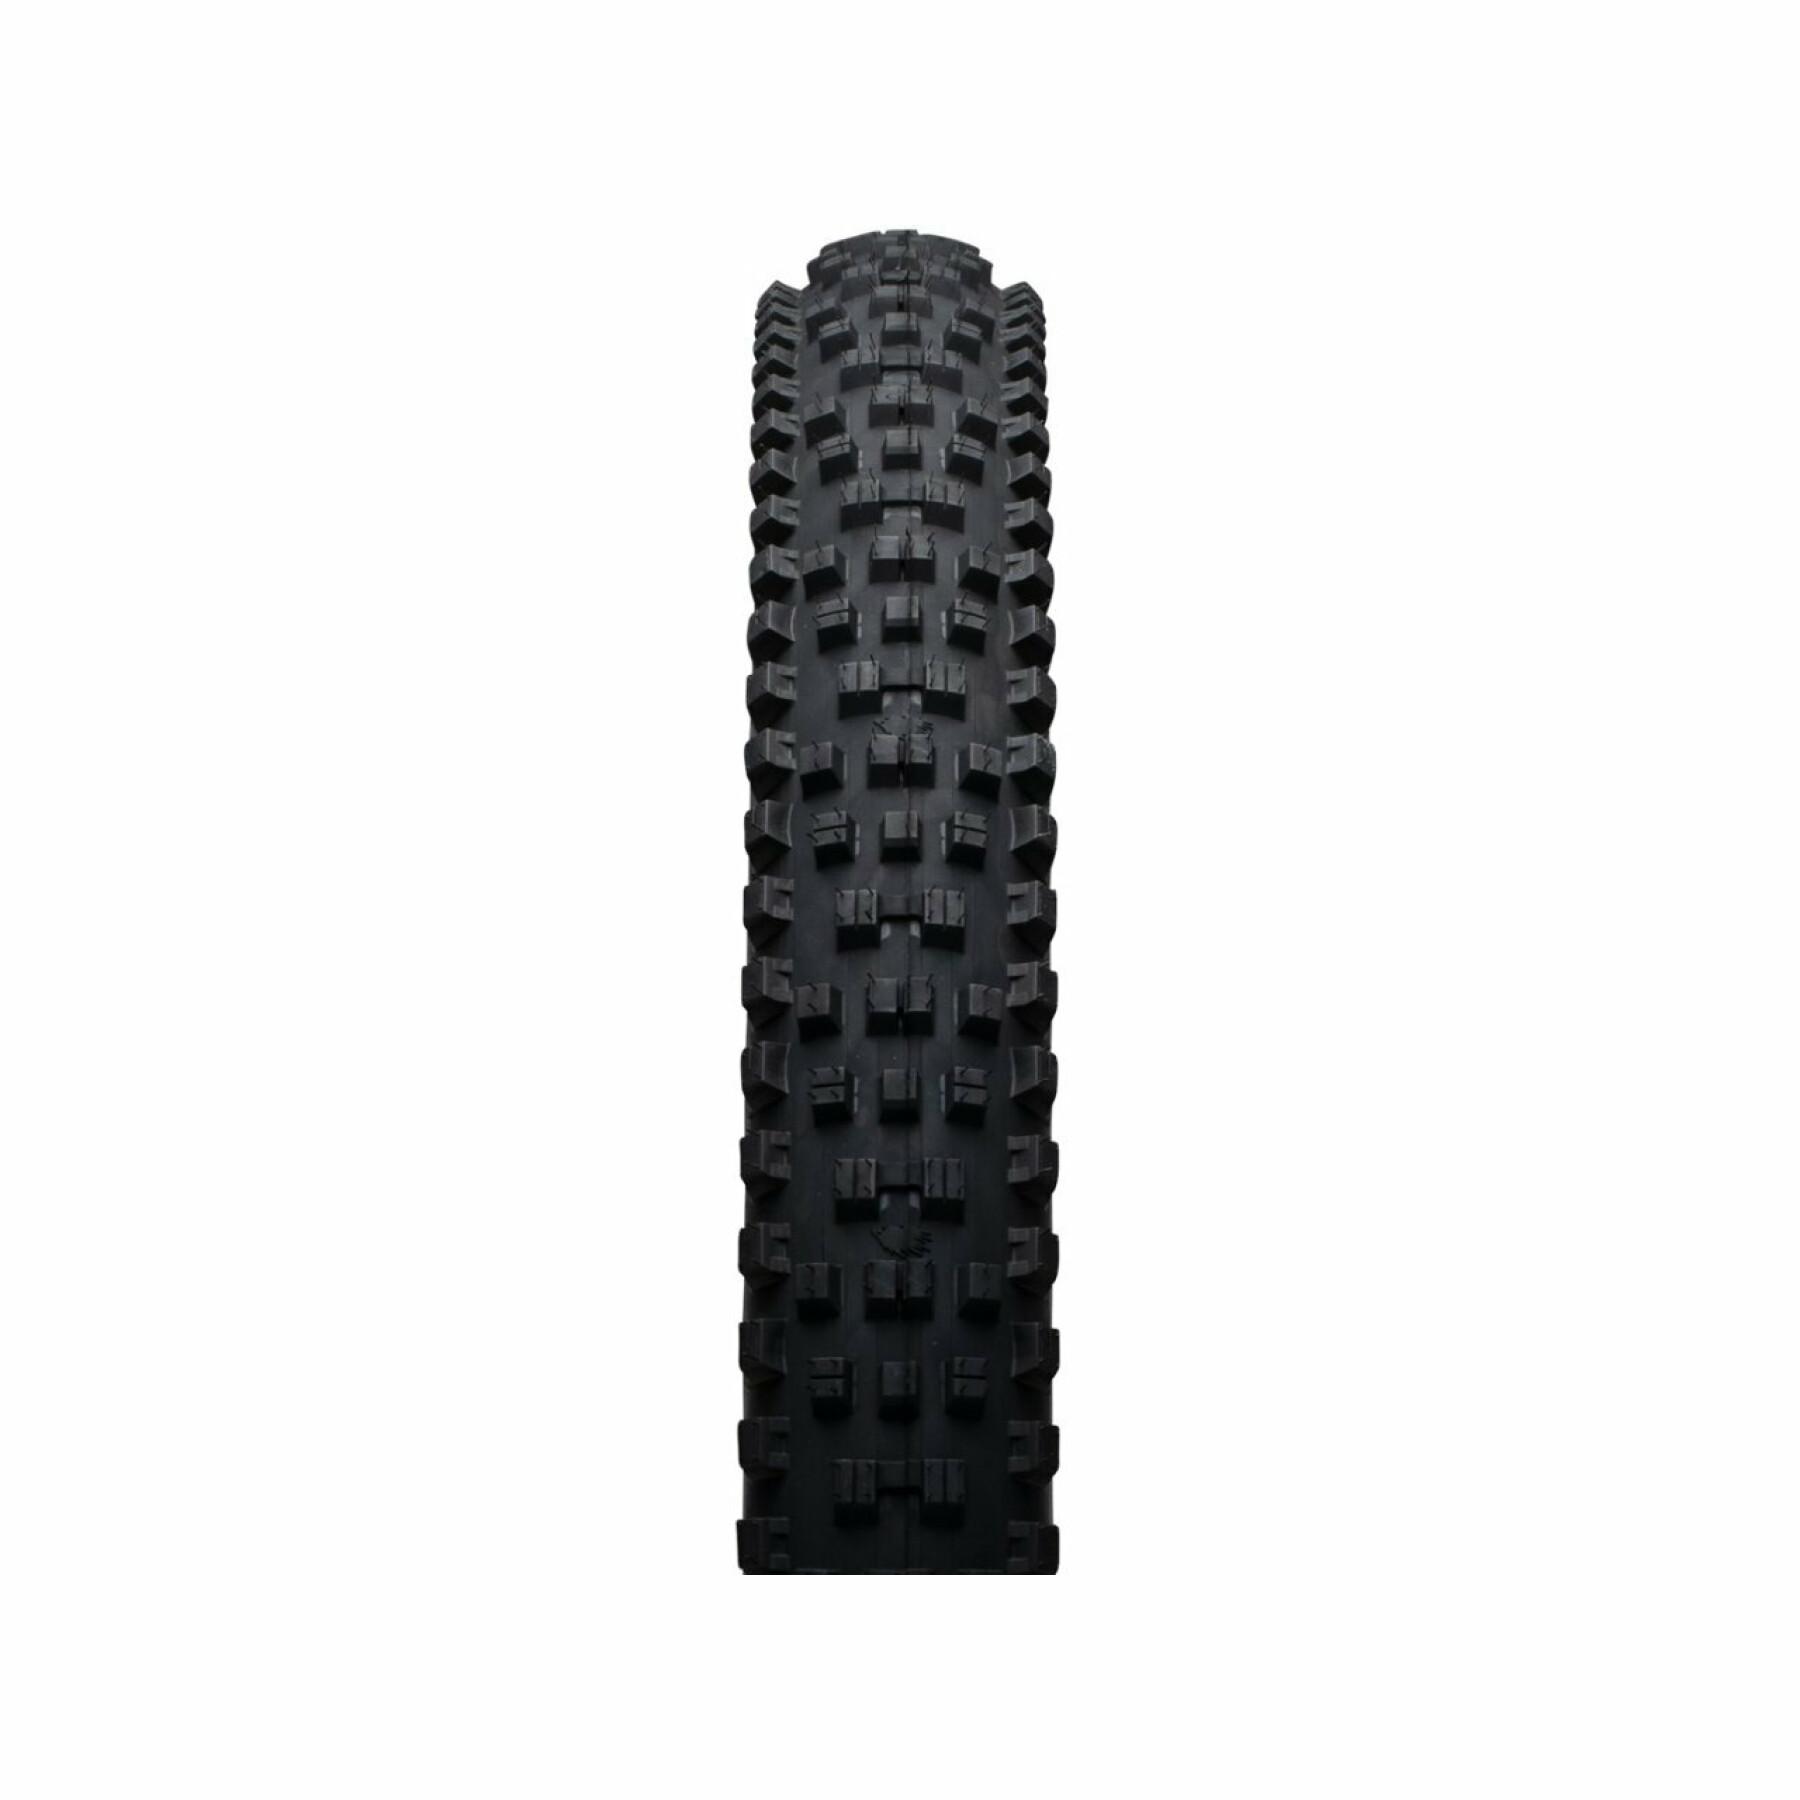 Band Onza Porcupine TRC 60 TPI gomme ,60a | 45a, 61-622, 810